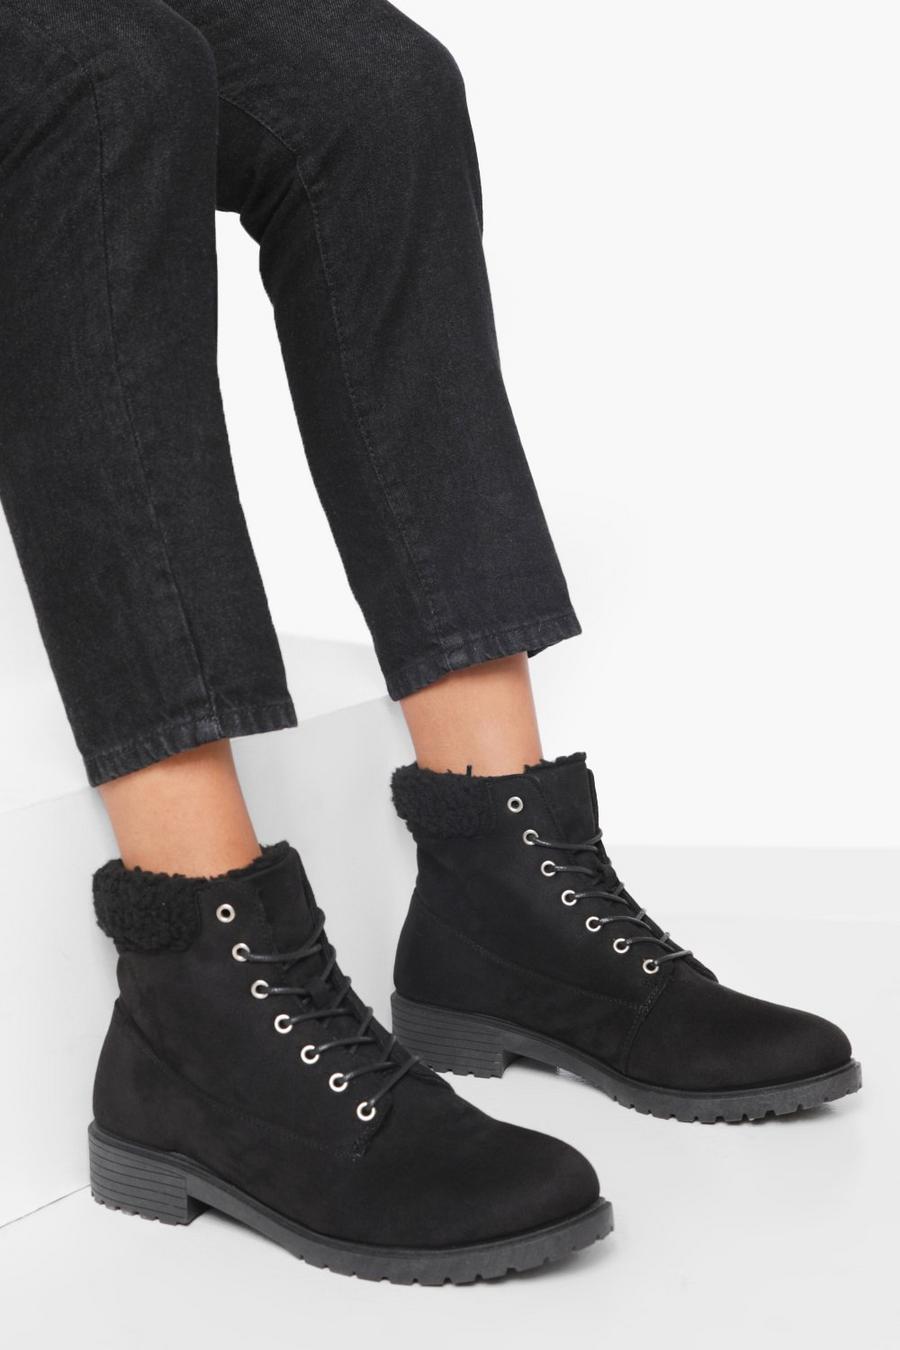 Black Wide Width Shearling Cuff Combat Boots image number 1